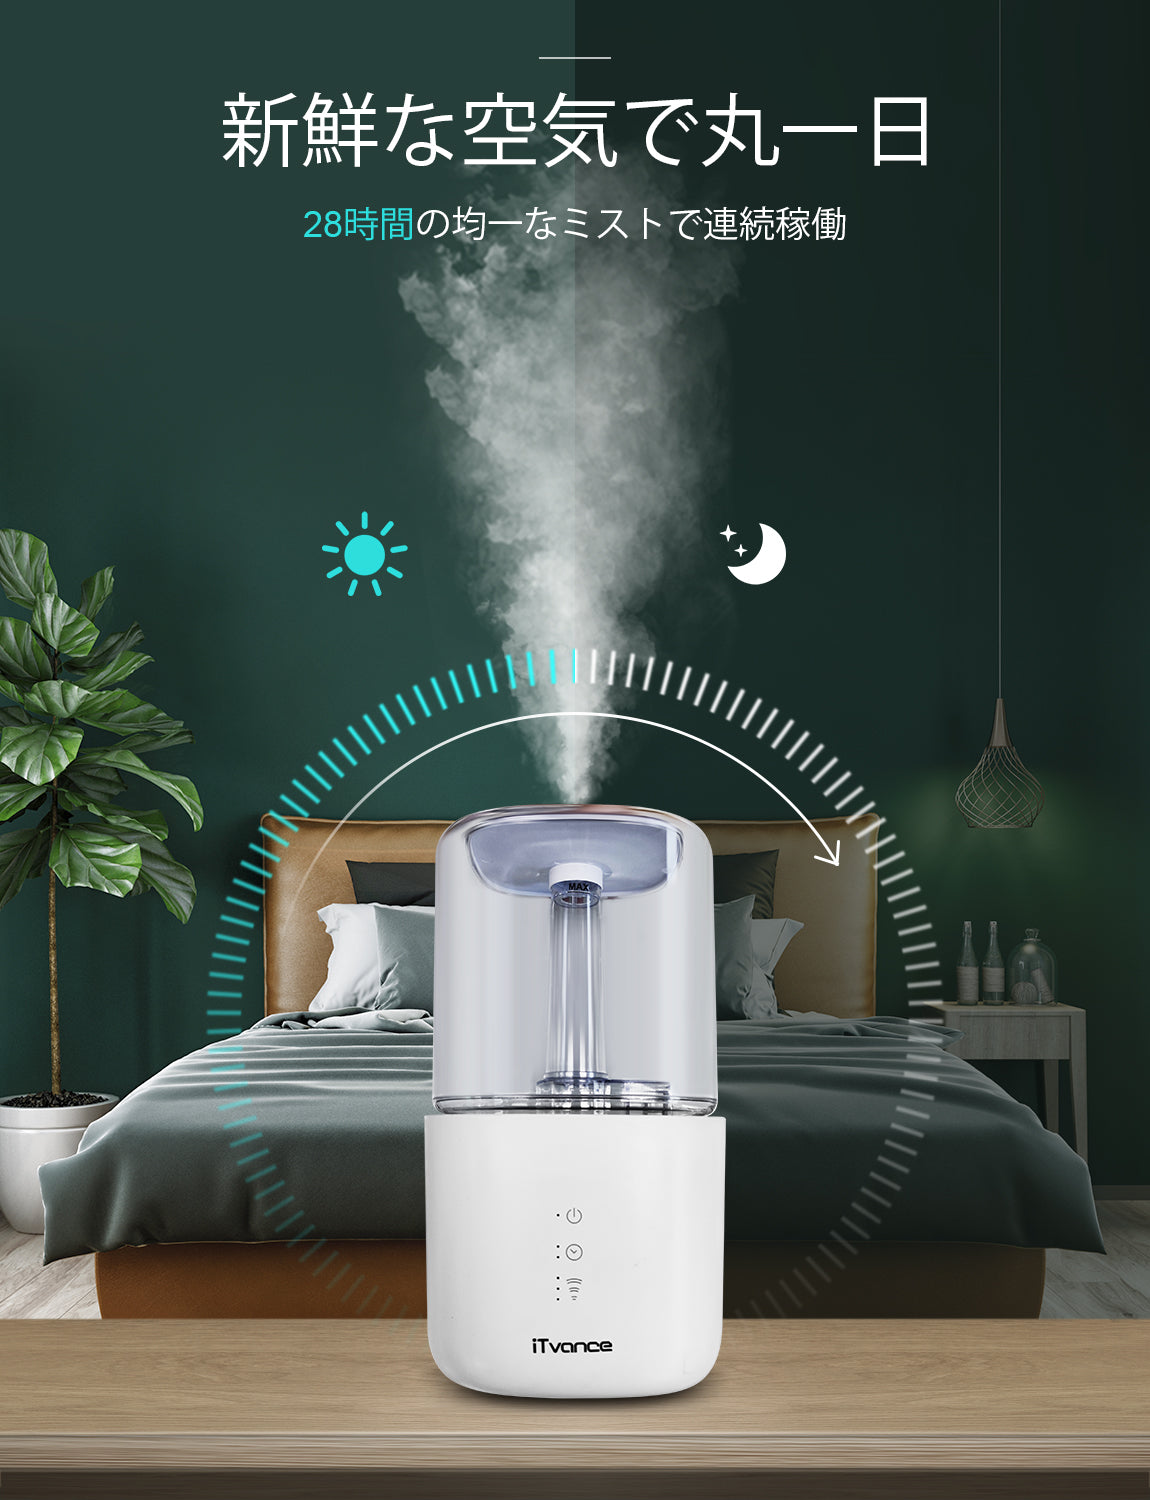 Cool Mist Air Humidifier 2.5L Whisper Quiet for Bedroom Home Office Baby  Room